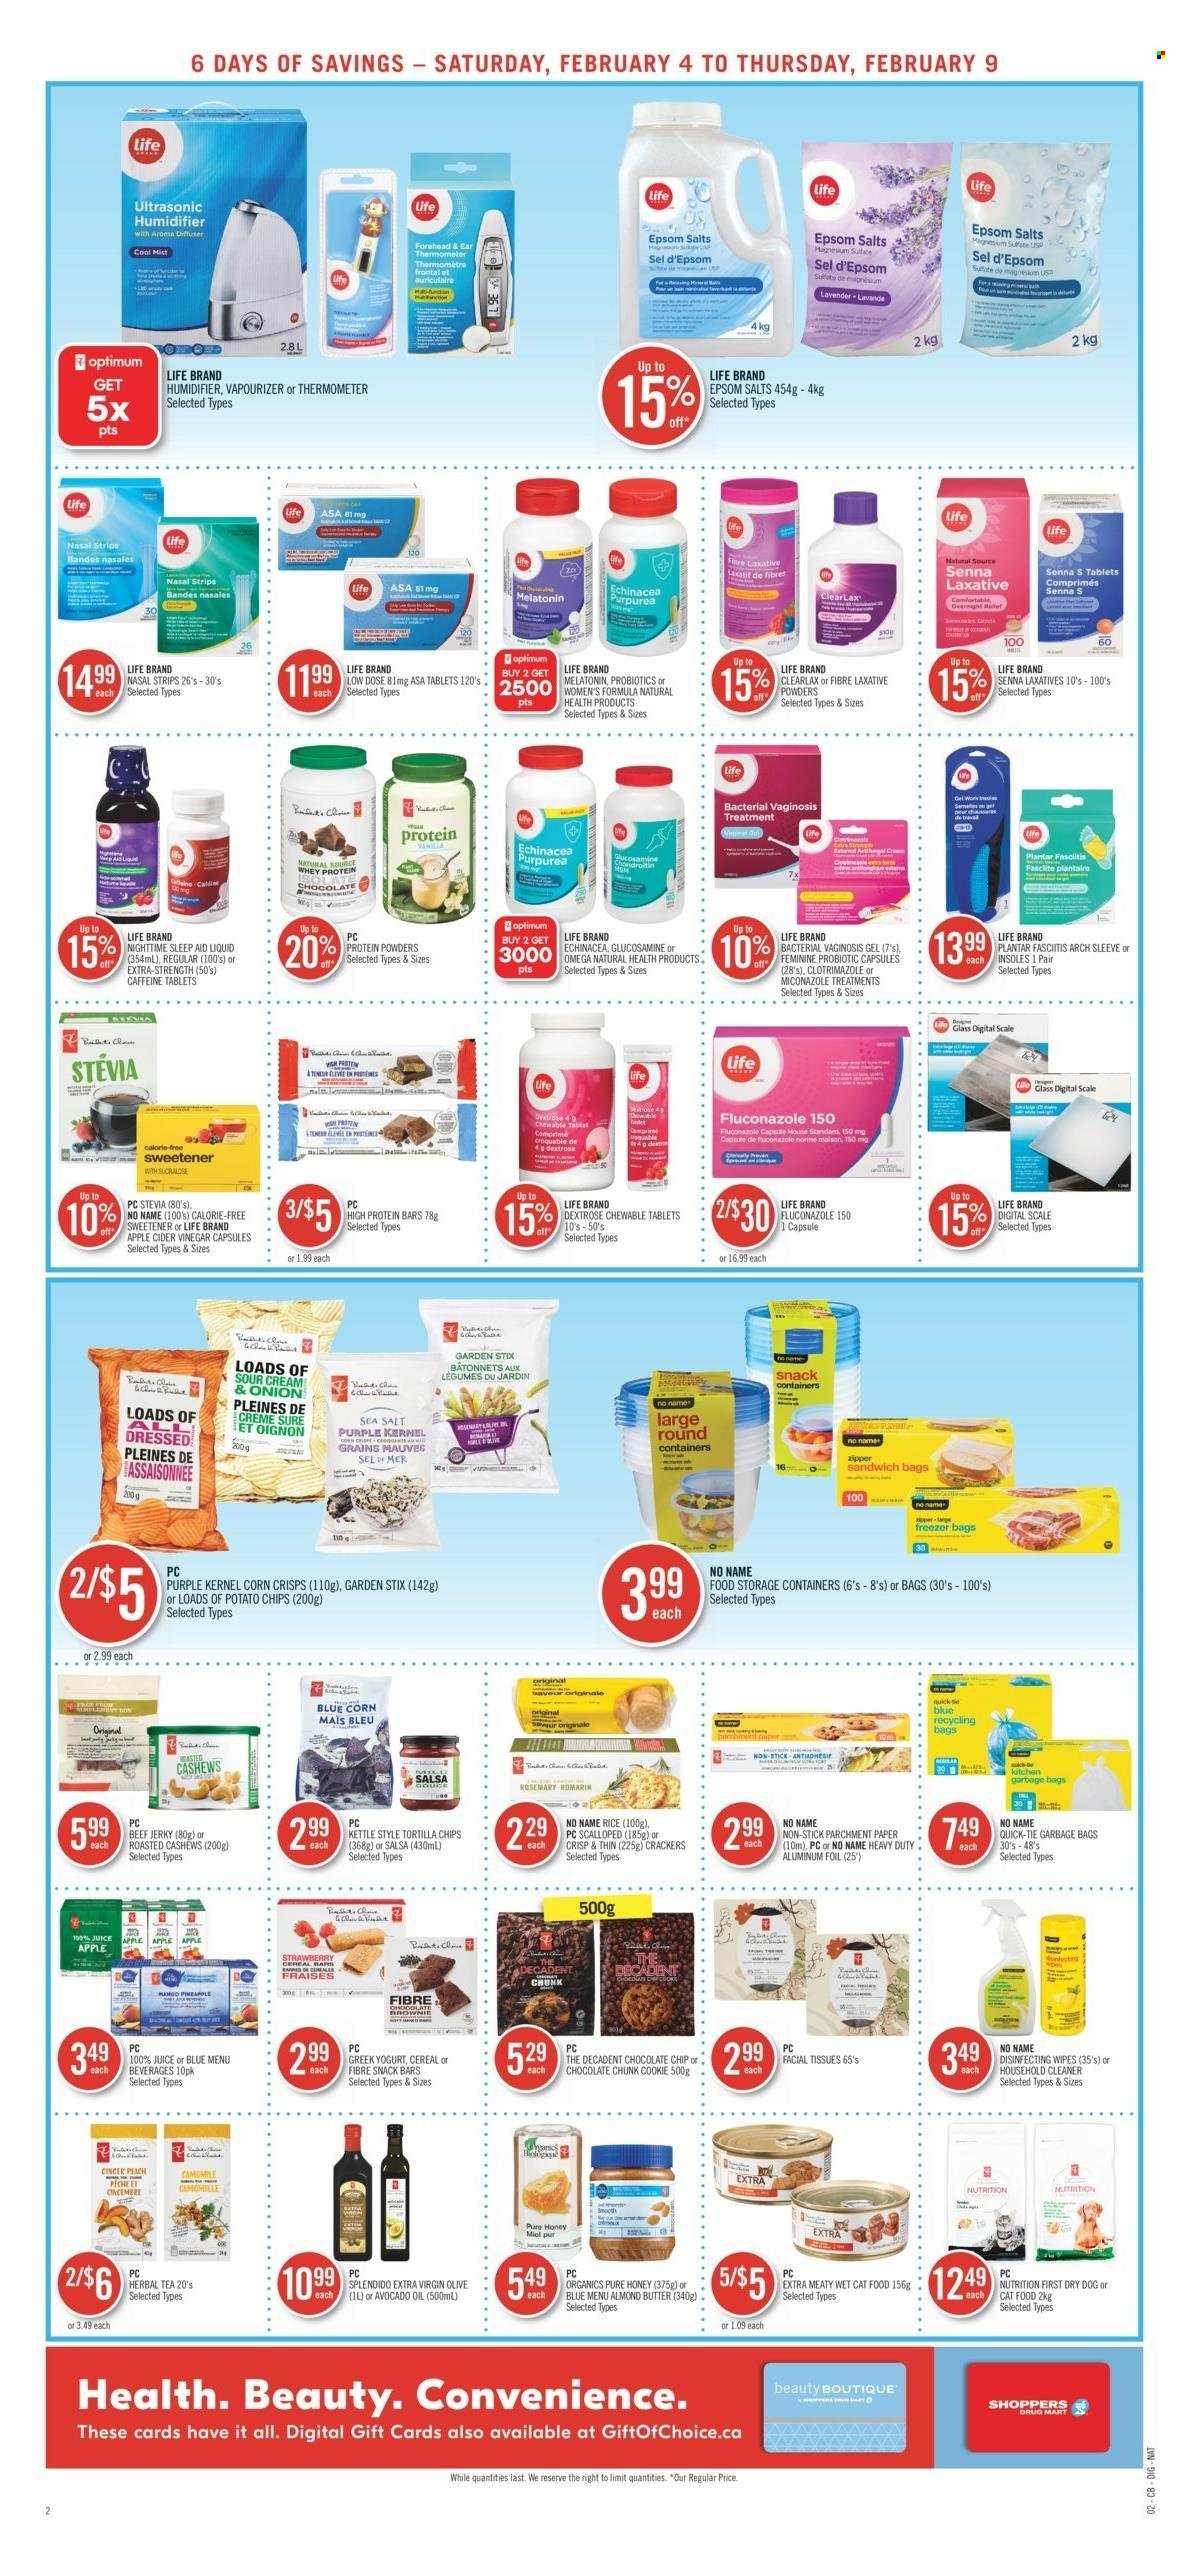 thumbnail - Shoppers Drug Mart Flyer - February 04, 2023 - February 09, 2023 - Sales products - scale, No Name, beef jerky, jerky, greek yoghurt, yoghurt, almond butter, snack, brownies, crackers, snack bar, tortilla chips, potato chips, chips, stevia, sweetener, corn, cereals, protein bar, rice, rosemary, salsa, apple cider vinegar, avocado oil, extra virgin olive oil, honey, cashews, juice, tea, herbal tea, wipes, tissues, cleaner, facial tissues, Sure, thermometer, plate, aluminium foil, freezer bag, storage box, diffuser, animal food, cat food, Optimum, wet cat food, humidifier, glucosamine, probiotics, whey protein, laxative, Low Dose. Page 16.